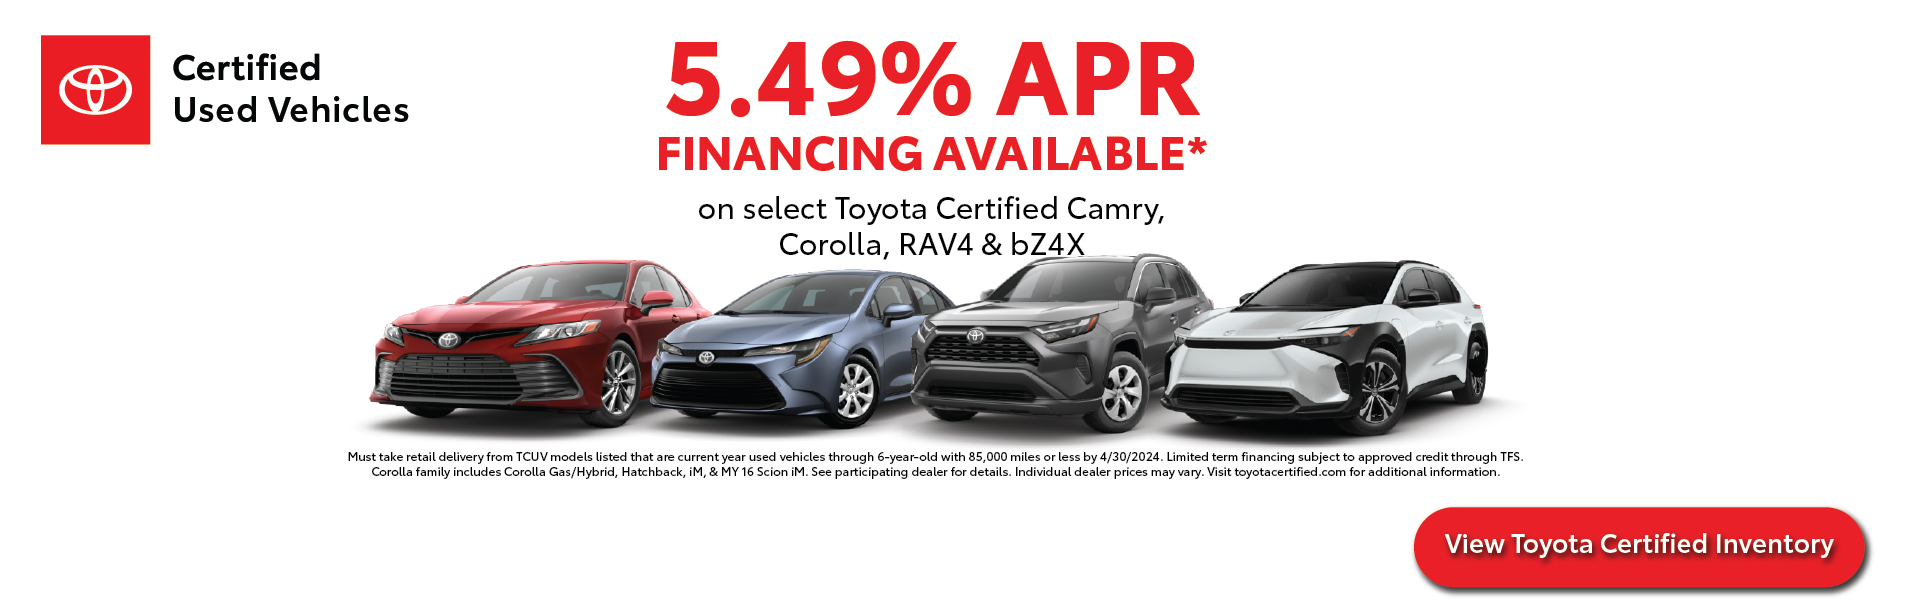 Toyota Certified Used Vehicle Offer | Ed Martin Toyota in Noblesville IN